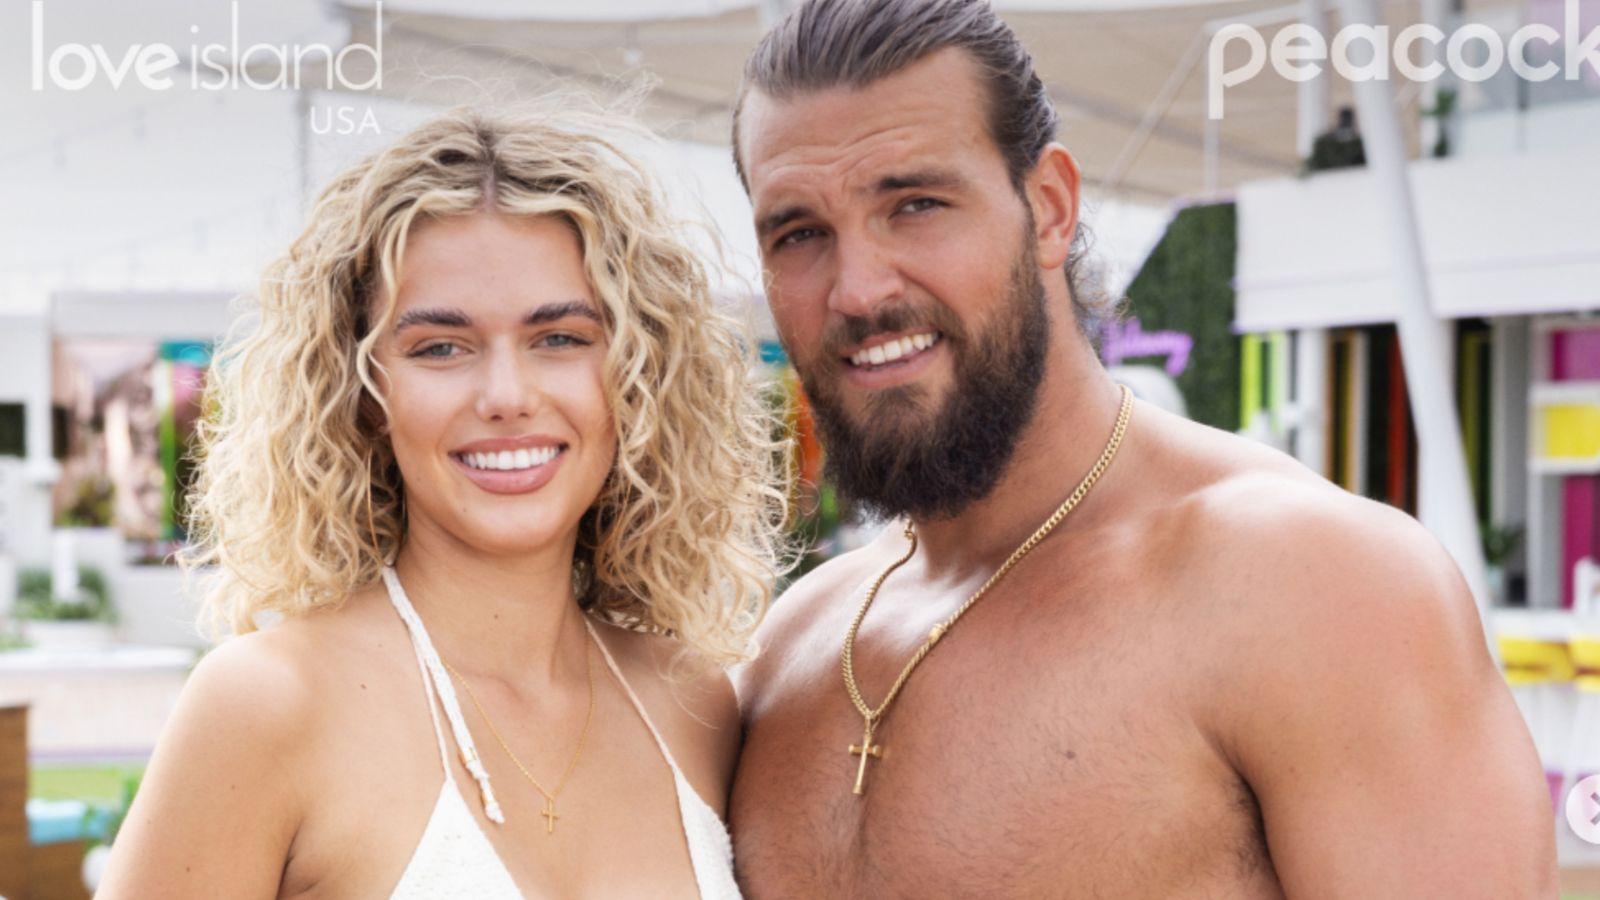 How does Victor feel about his elimination? 'Love Island USA' Season 5 star  opens up about not making any romantic connection